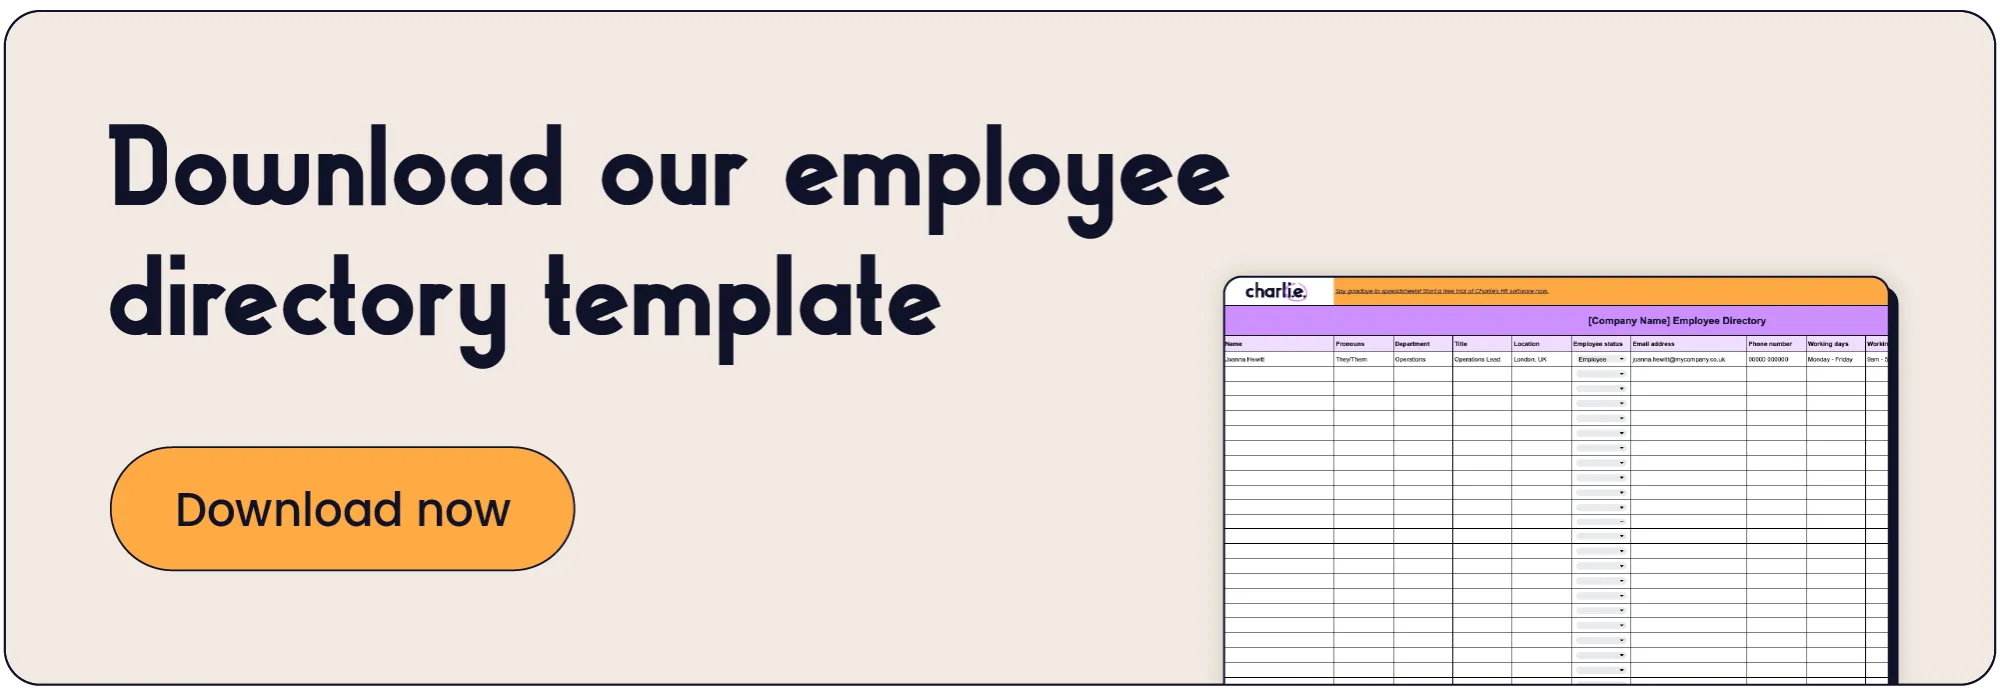 Download our employee directory template-01.webp